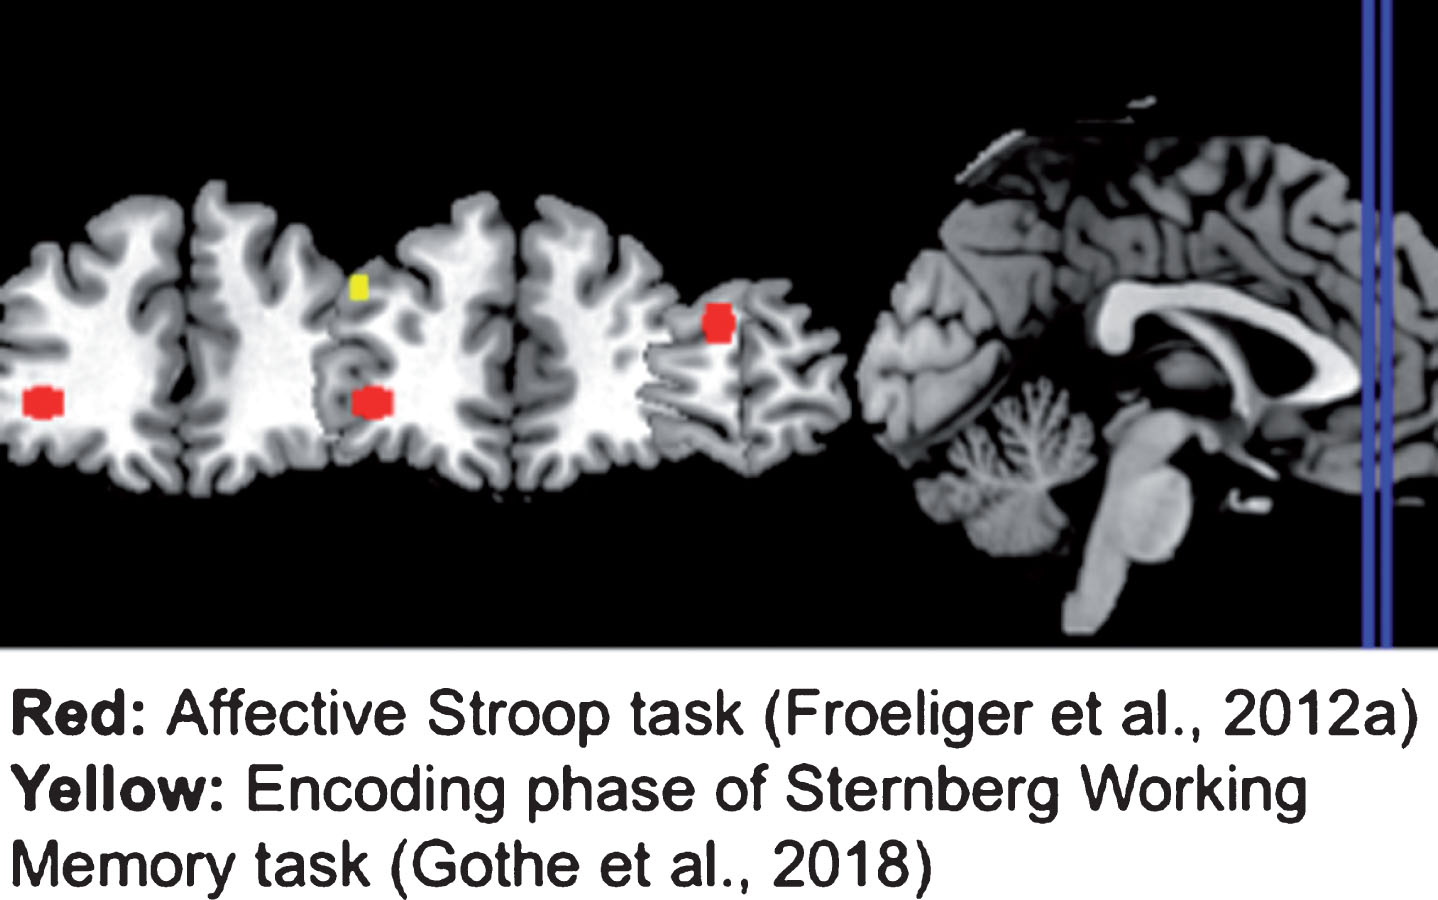 Brain regions showing differential task-related activation in yoga-practitioners. Yoga practitioners showed less activation than non-practitioners in the left dorsolateral prefrontal cortex during the encoding phase of a Sternberg Working Memory task (yellow). Yoga practitioners also showed less activation than non-practitioners in the right dorsolateral prefrontal cortex and right superior frontal gyri, but more activation in the left ventrolateral prefrontal cortex during various aspects of an Affective Stroop task (red). All regions shown were created by making a 5 mm sphere around the coordinates provided in the studies reviewed.